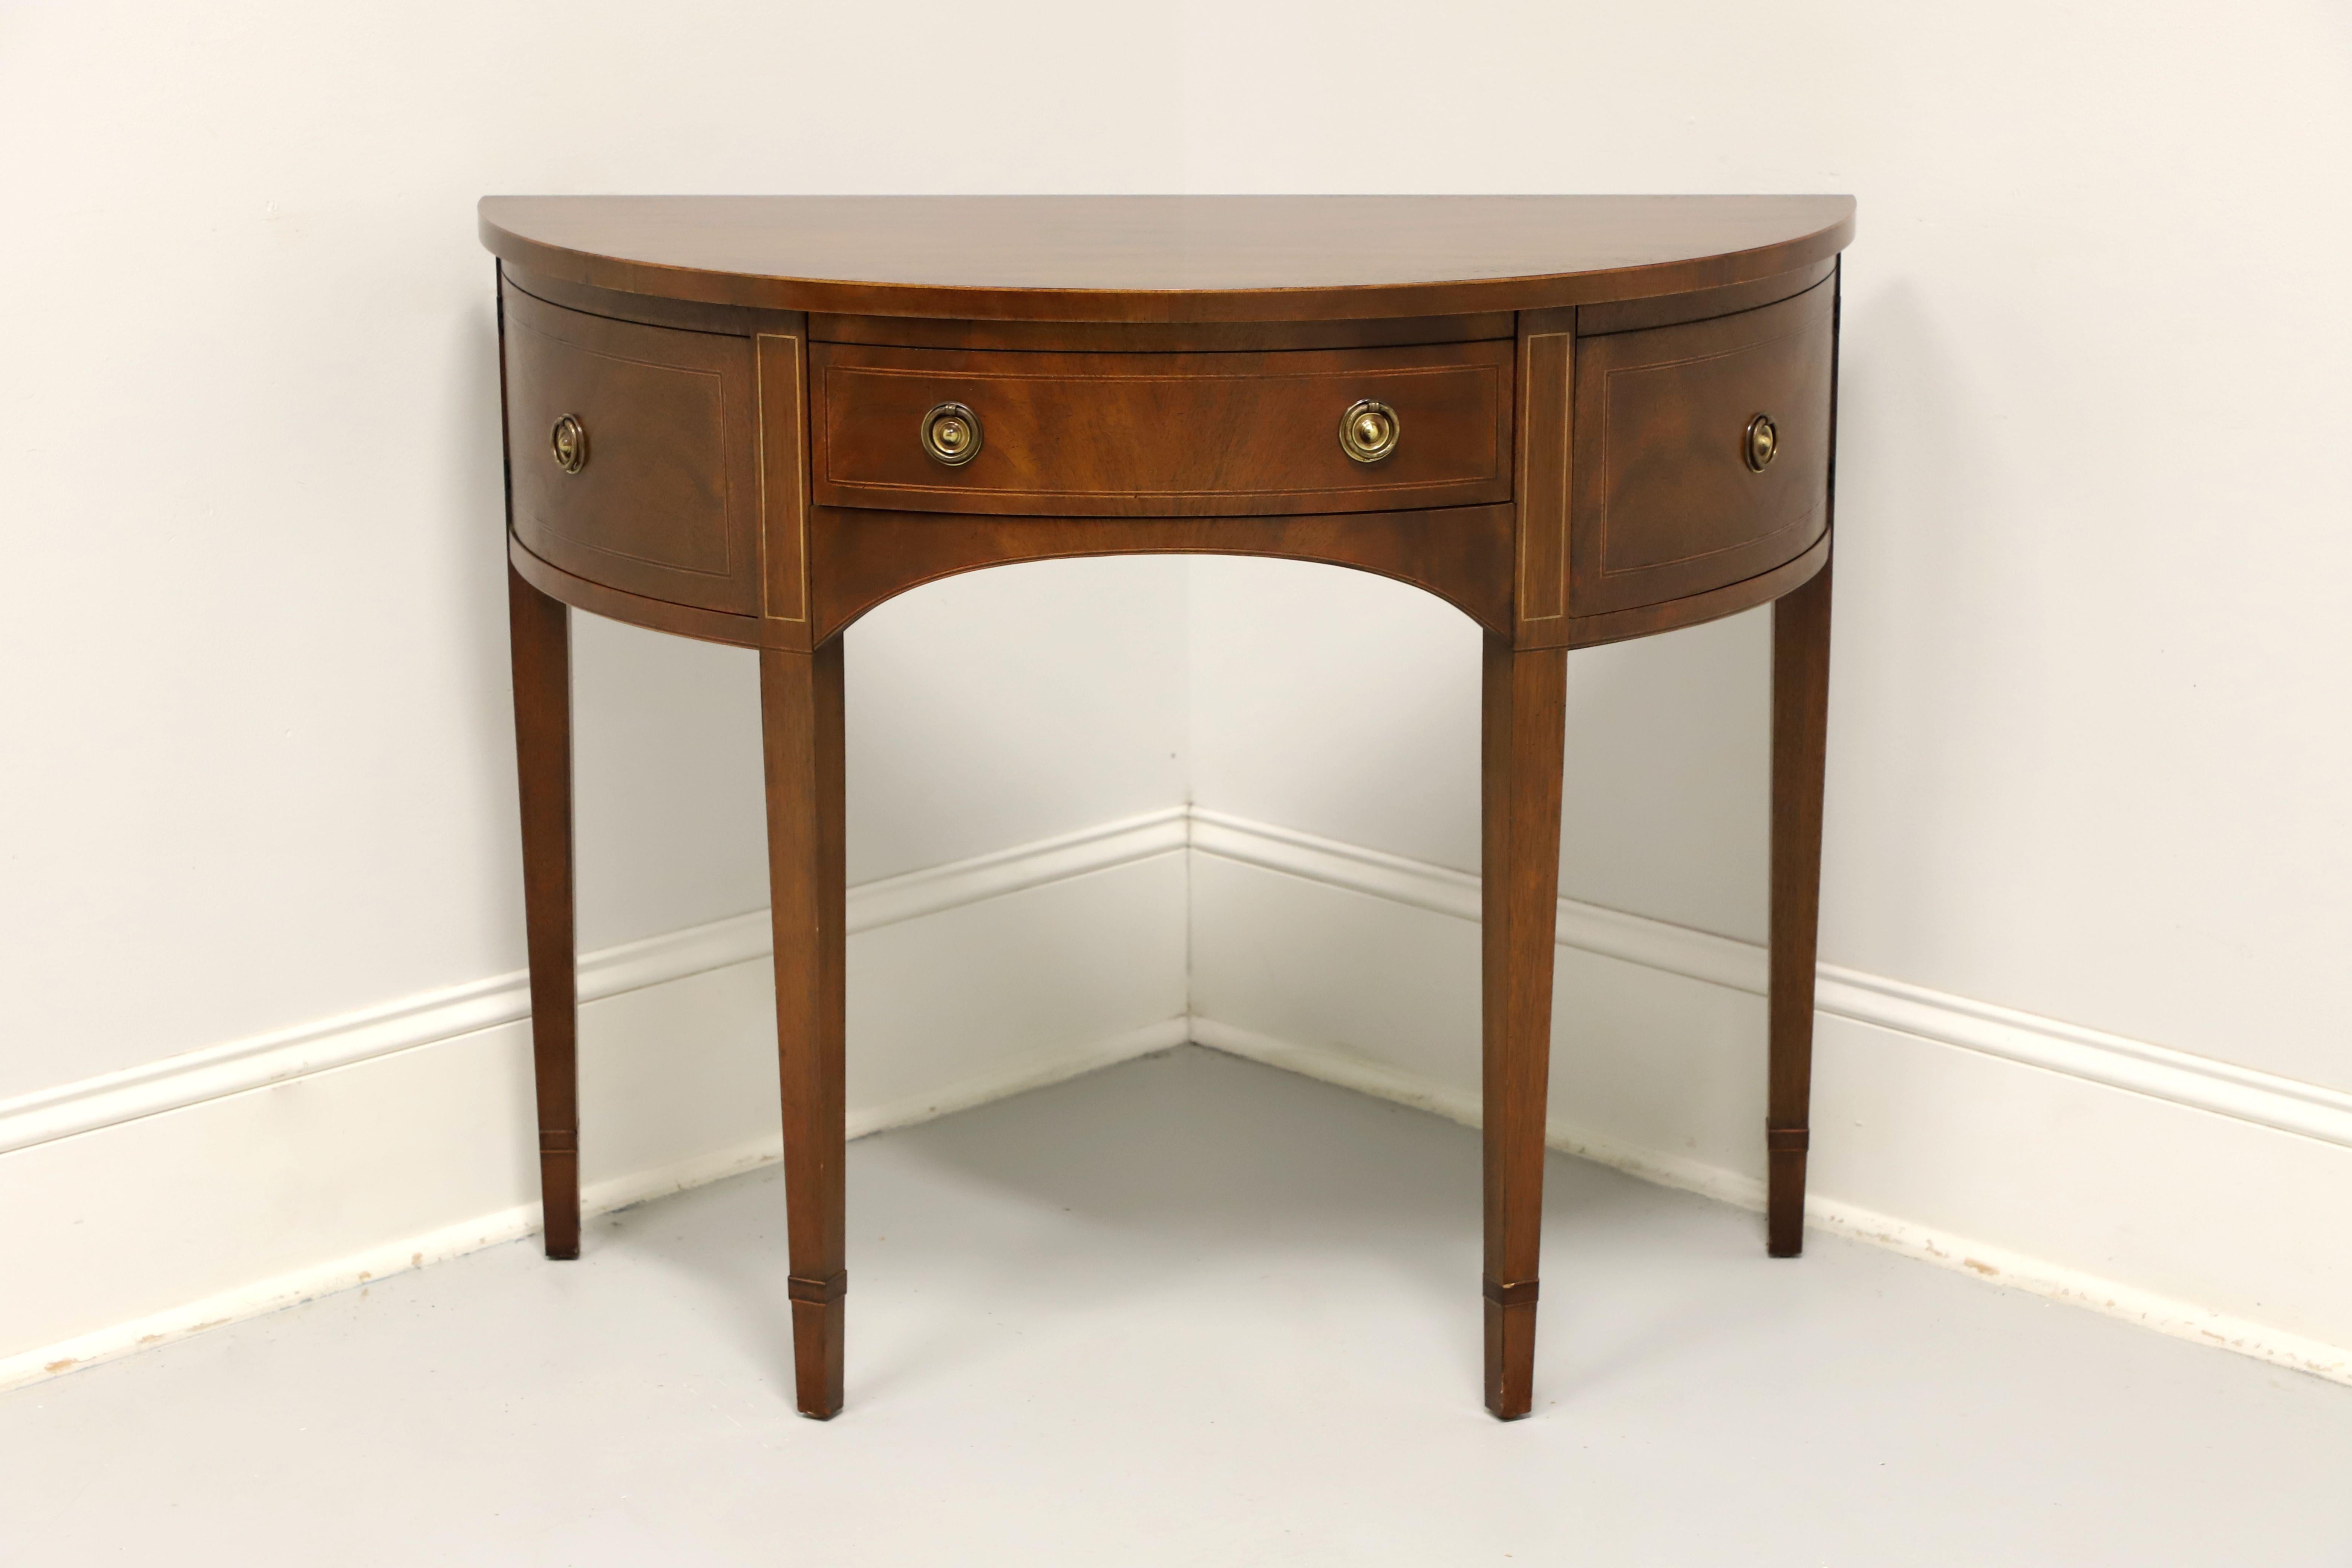 A Hepplewhite style demilune console table or server by top-quality furniture maker Baker Furniture. Mahogany with smooth edge to top, inlays to doors, drawer & top of legs, arched apron, and straight tapered legs. Features a center drawer of